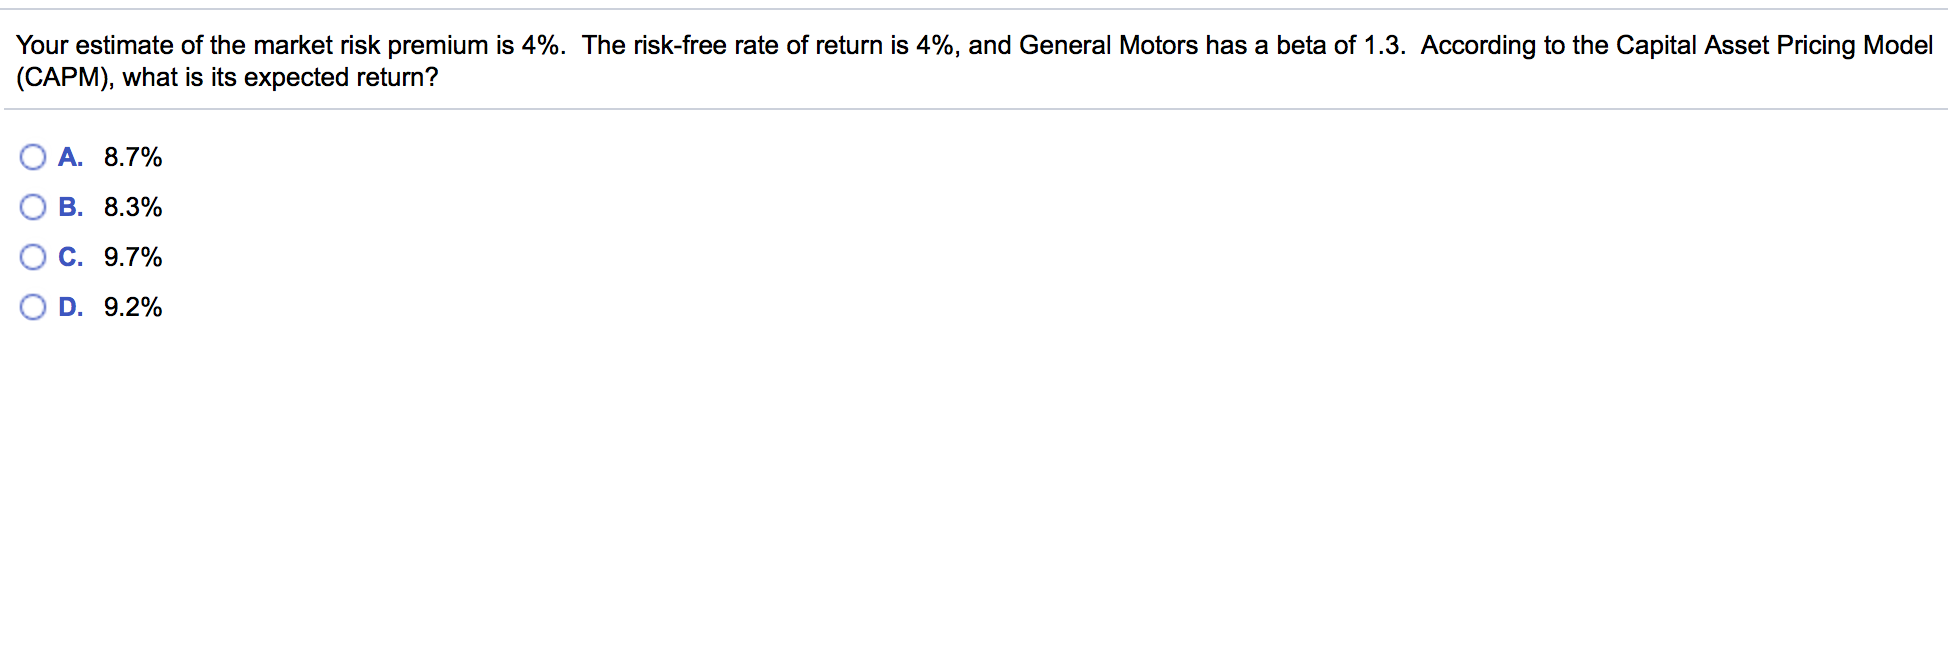 Your estimate of the market risk premium is 4%. The risk-free rate of return is 4%, and General Motors has a beta of 1.3. According to the Capital Asset Pricing Model
(CAPM), what is its expected return?
A. 8.7%
B. 8.3%
C. 9.7%
D. 9.2%
